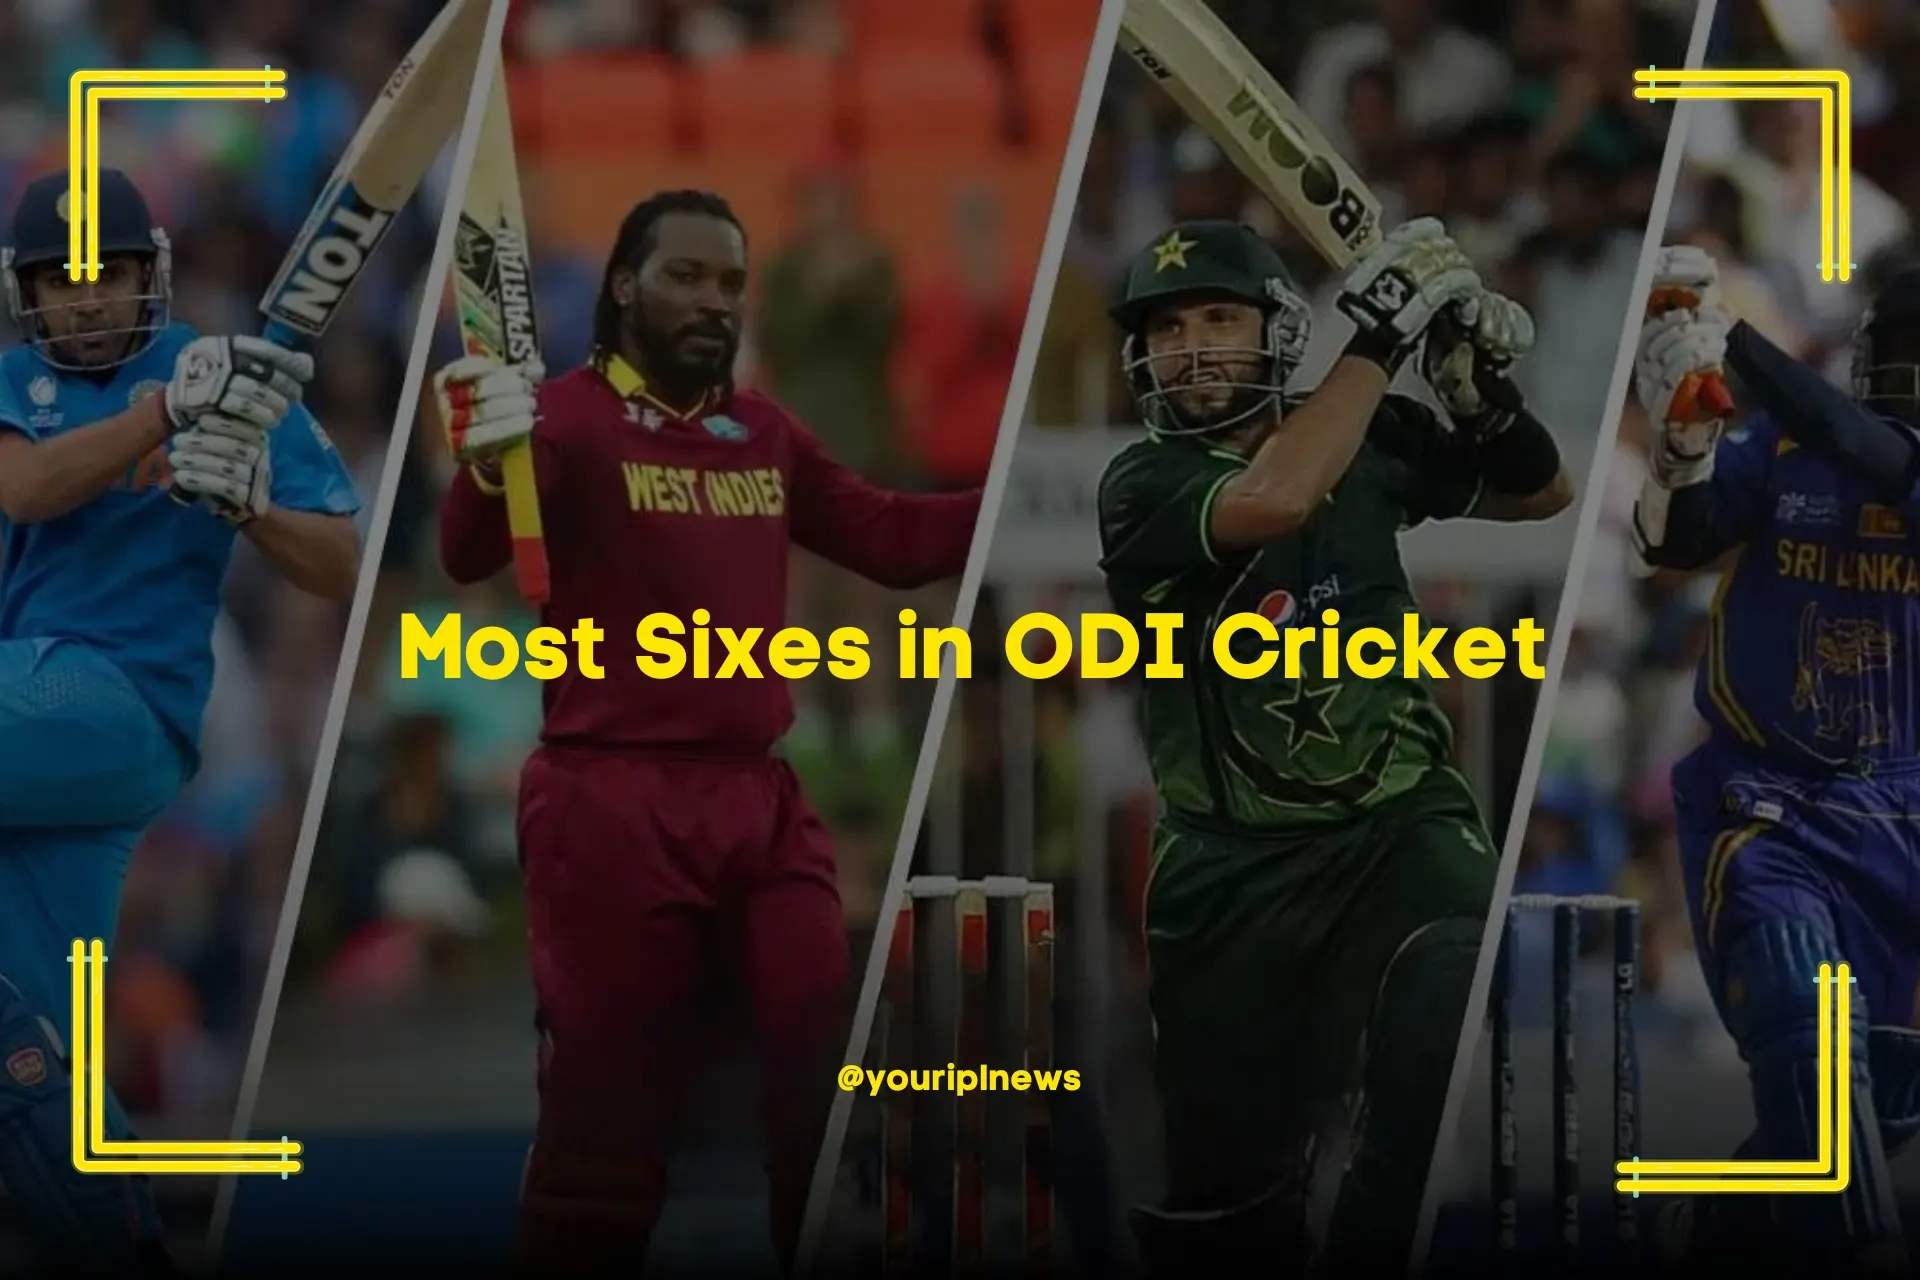 _Most Sixes in ODI Cricket